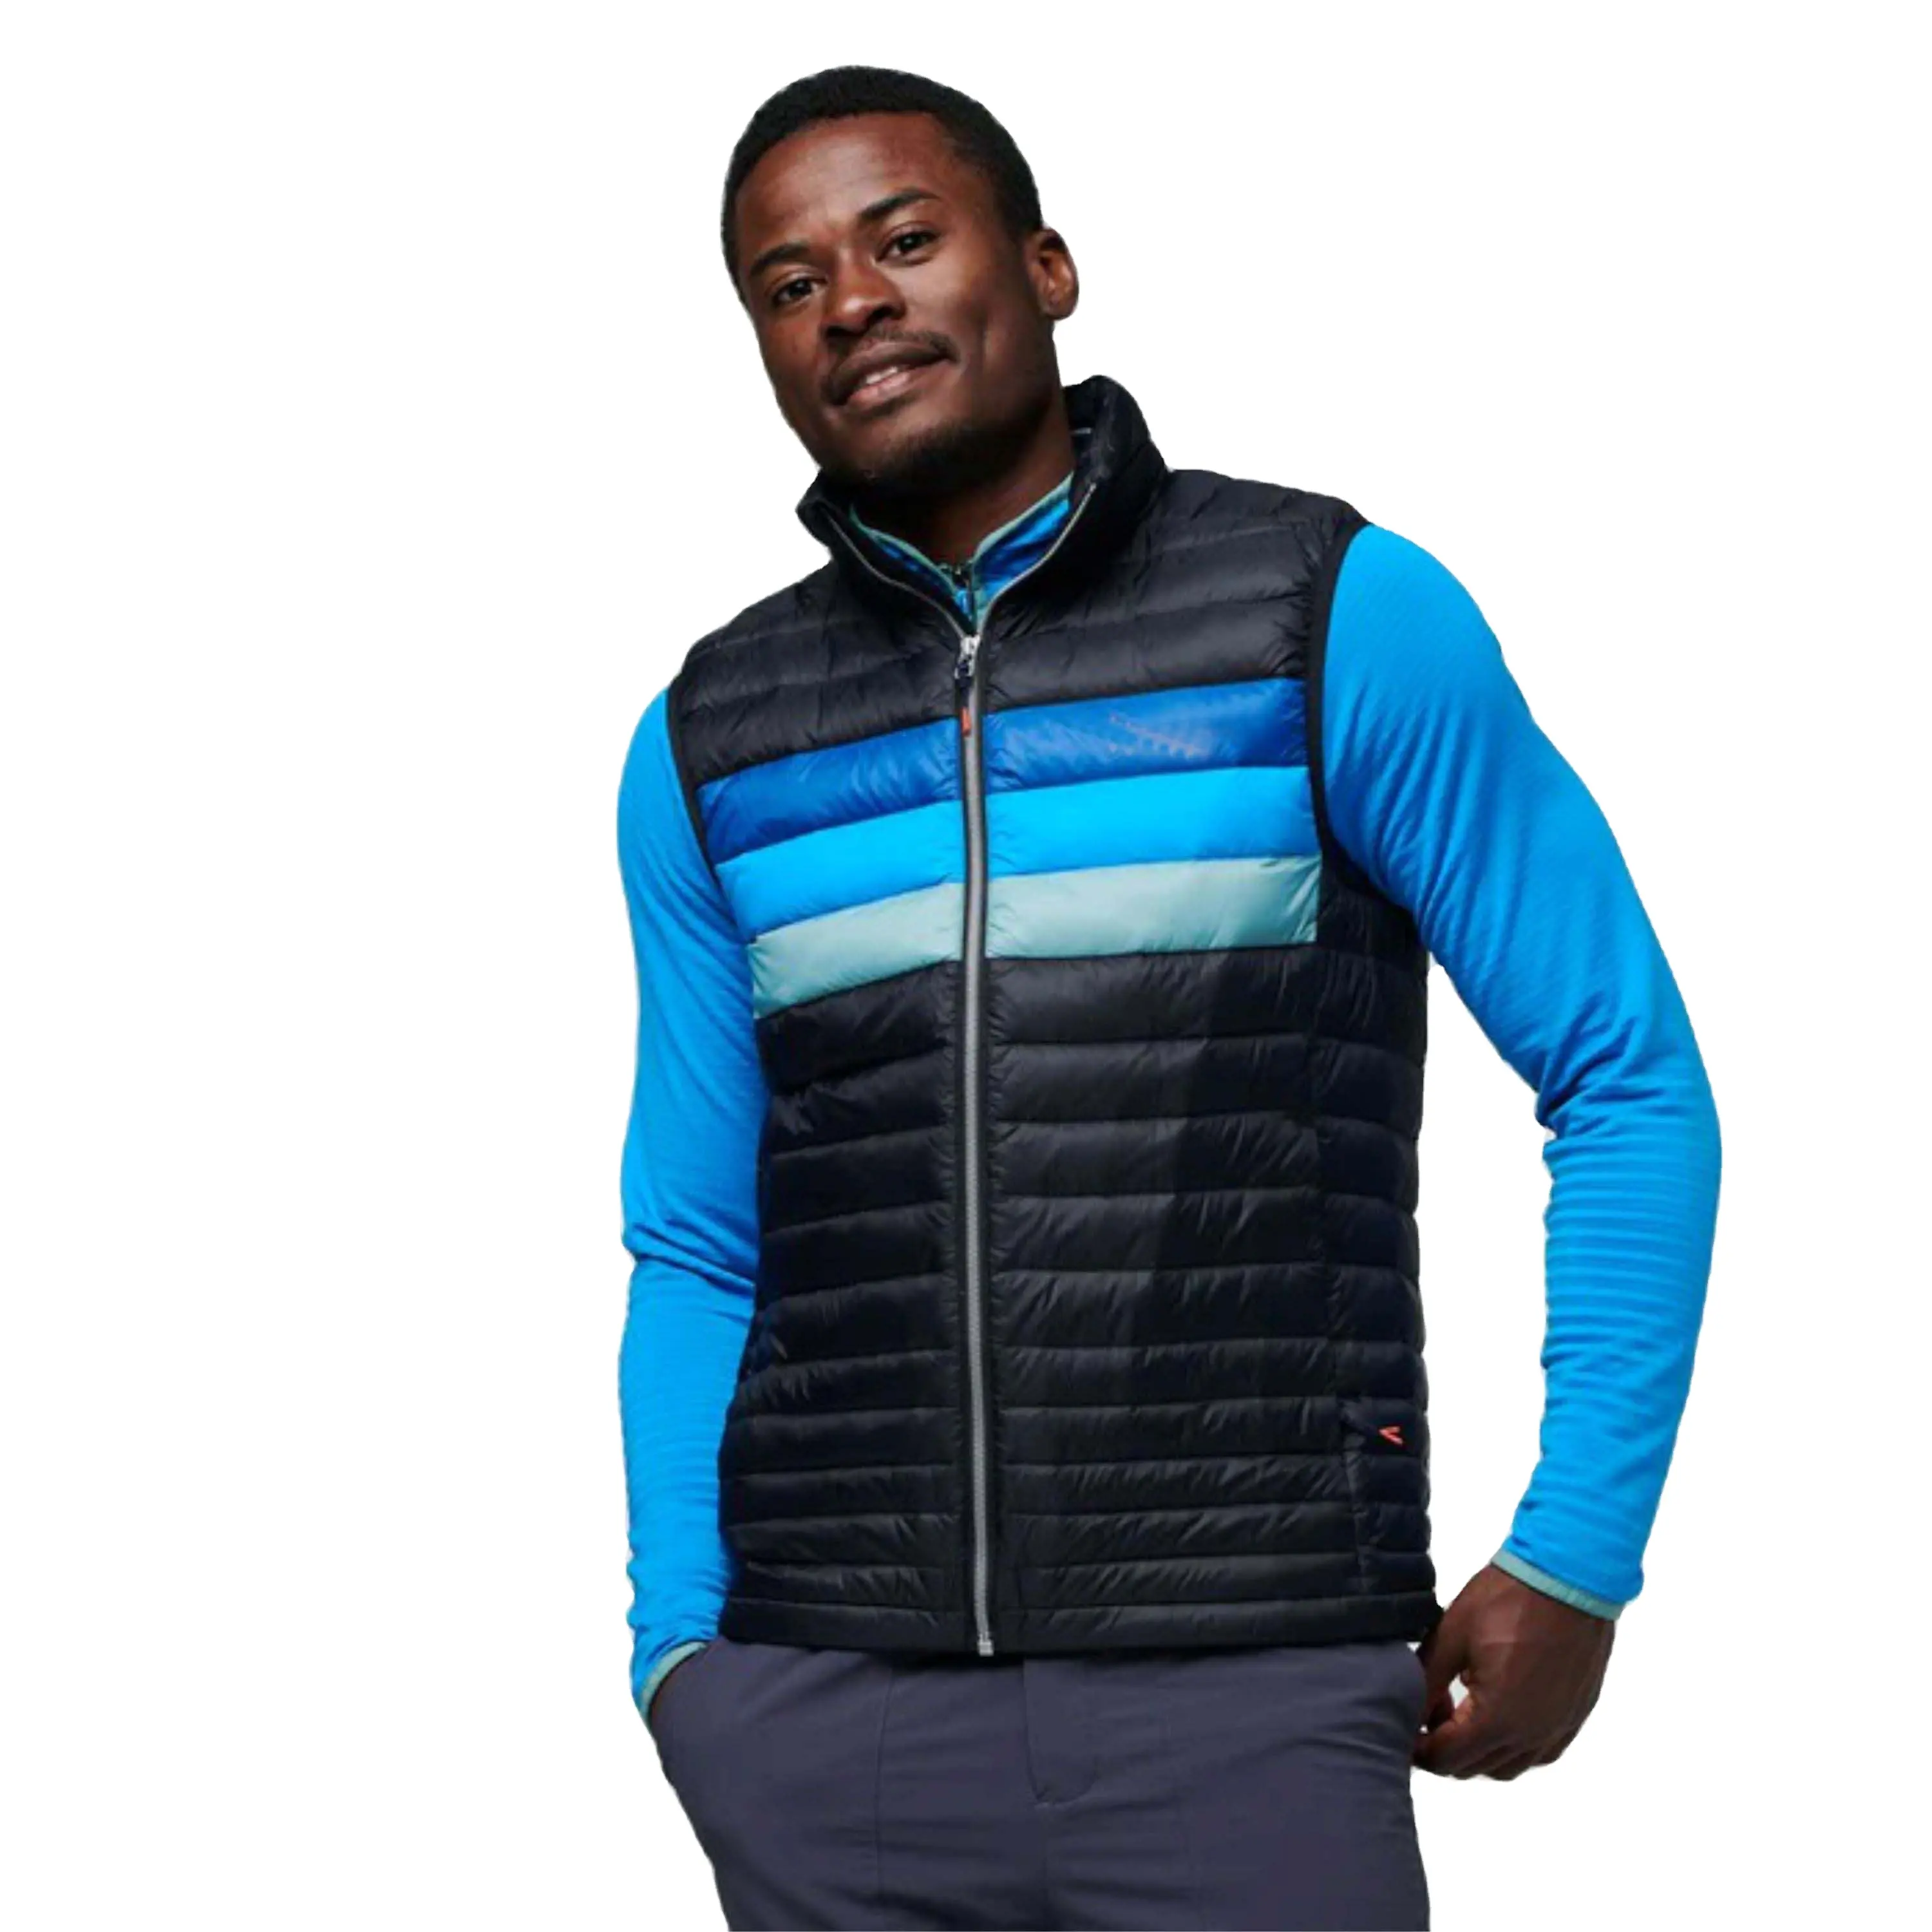 Classic Casual Men Down Vest | Thermal Insulated Soft Fabric Great for Everyday Use and Layering in Autumn